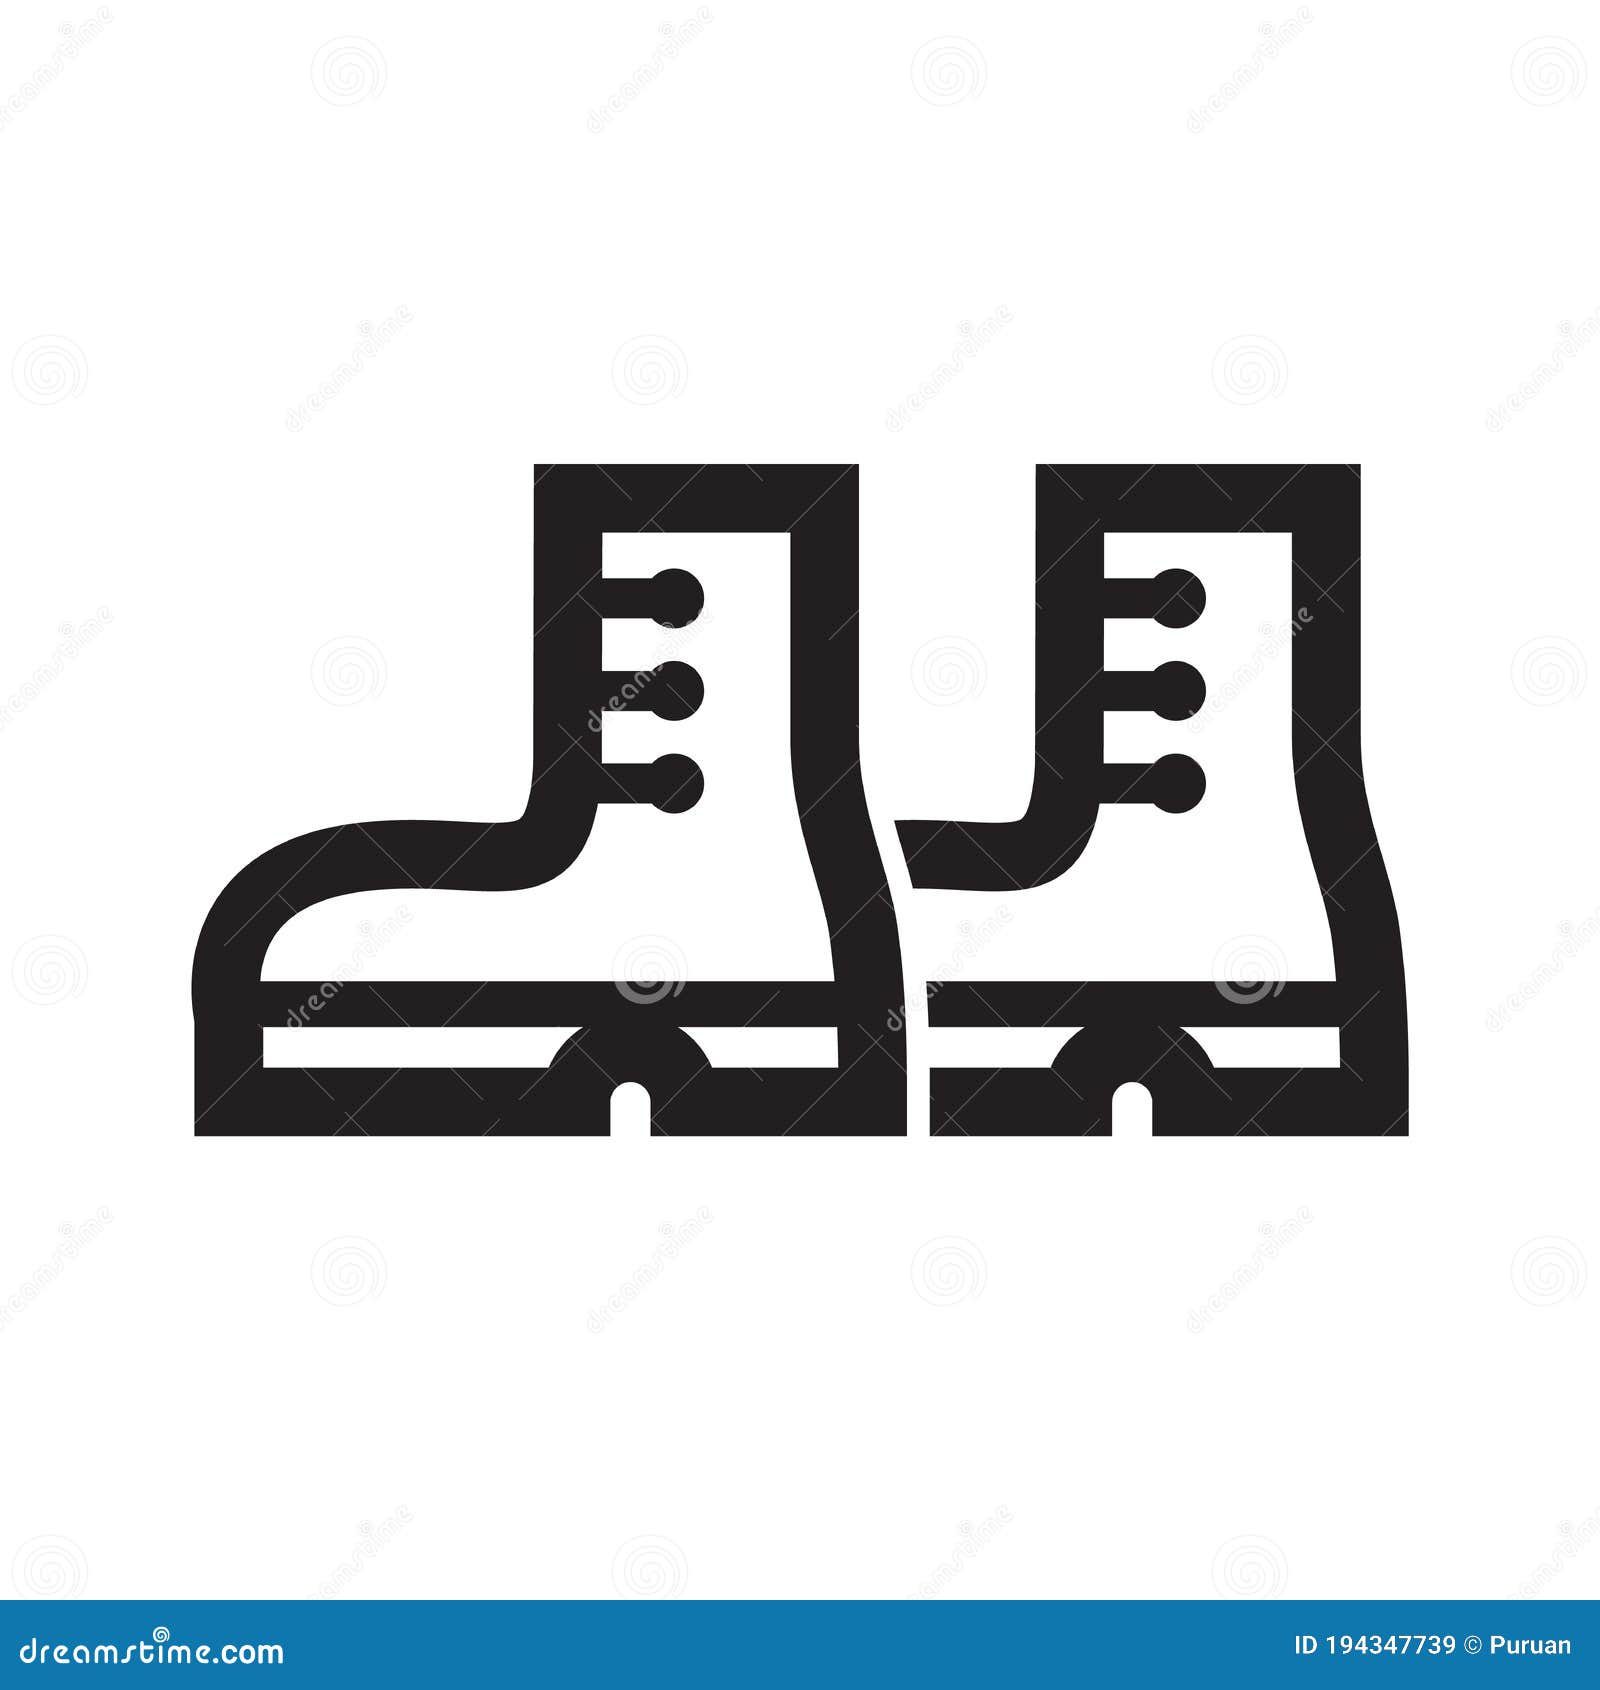 Outline Icon - Boot stock vector. Illustration of design - 194347739